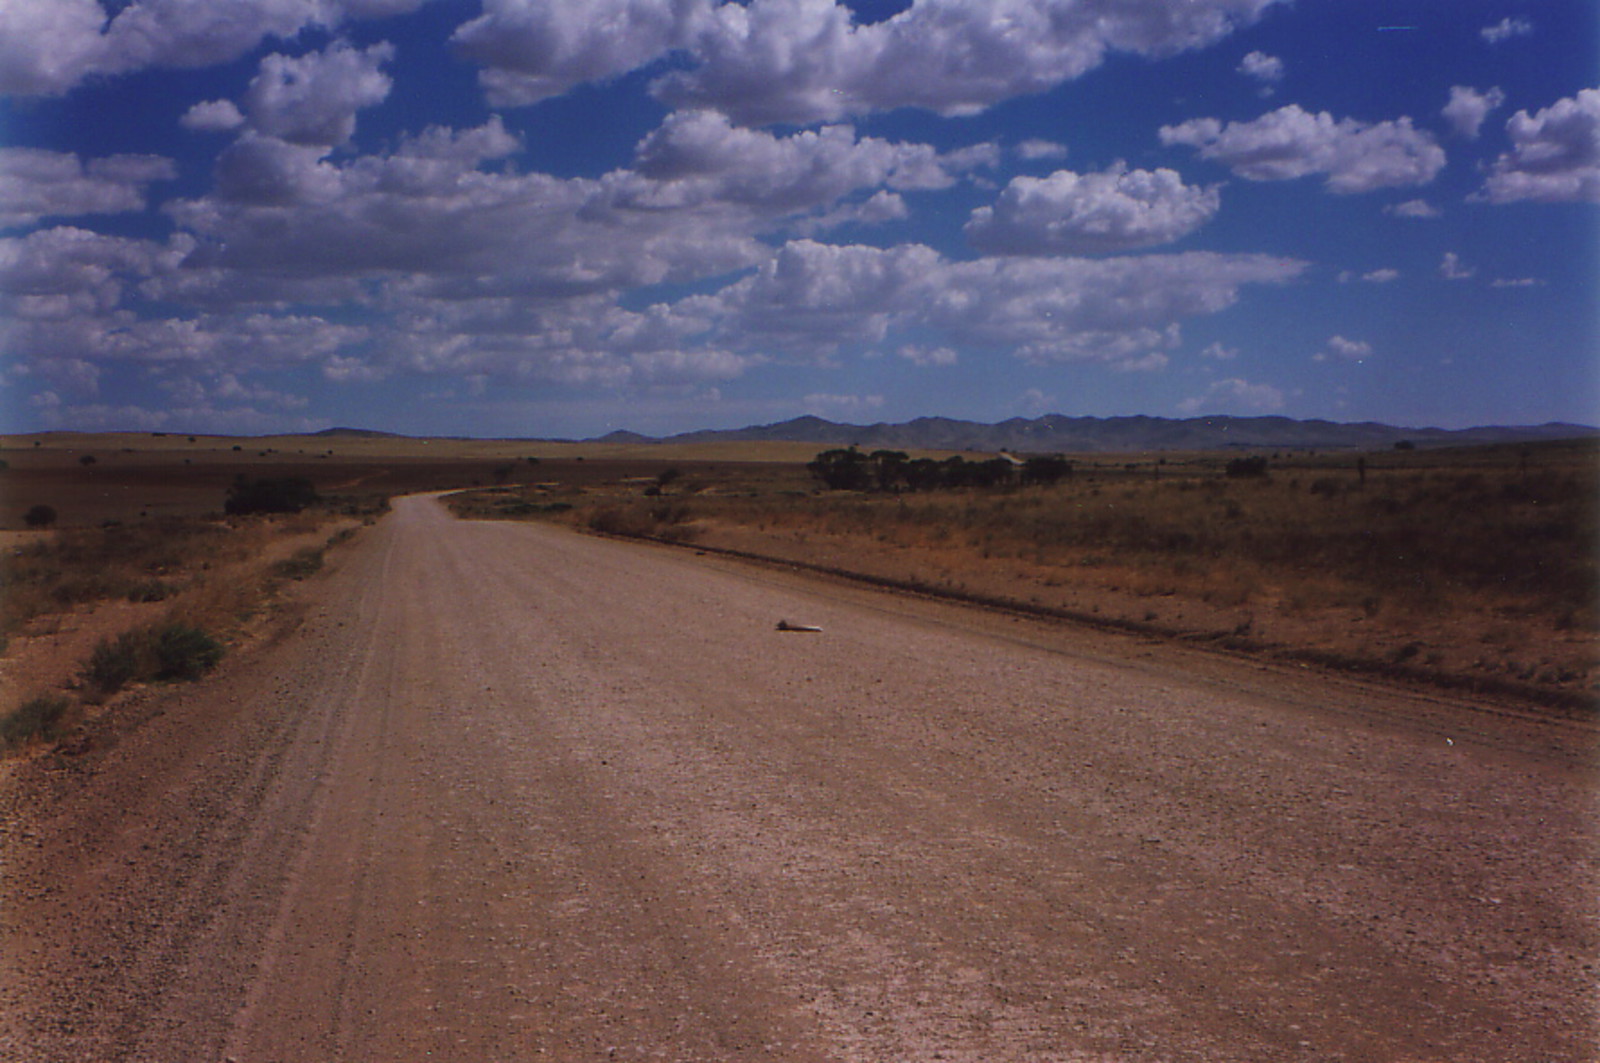 The road to the Flinders Ranges